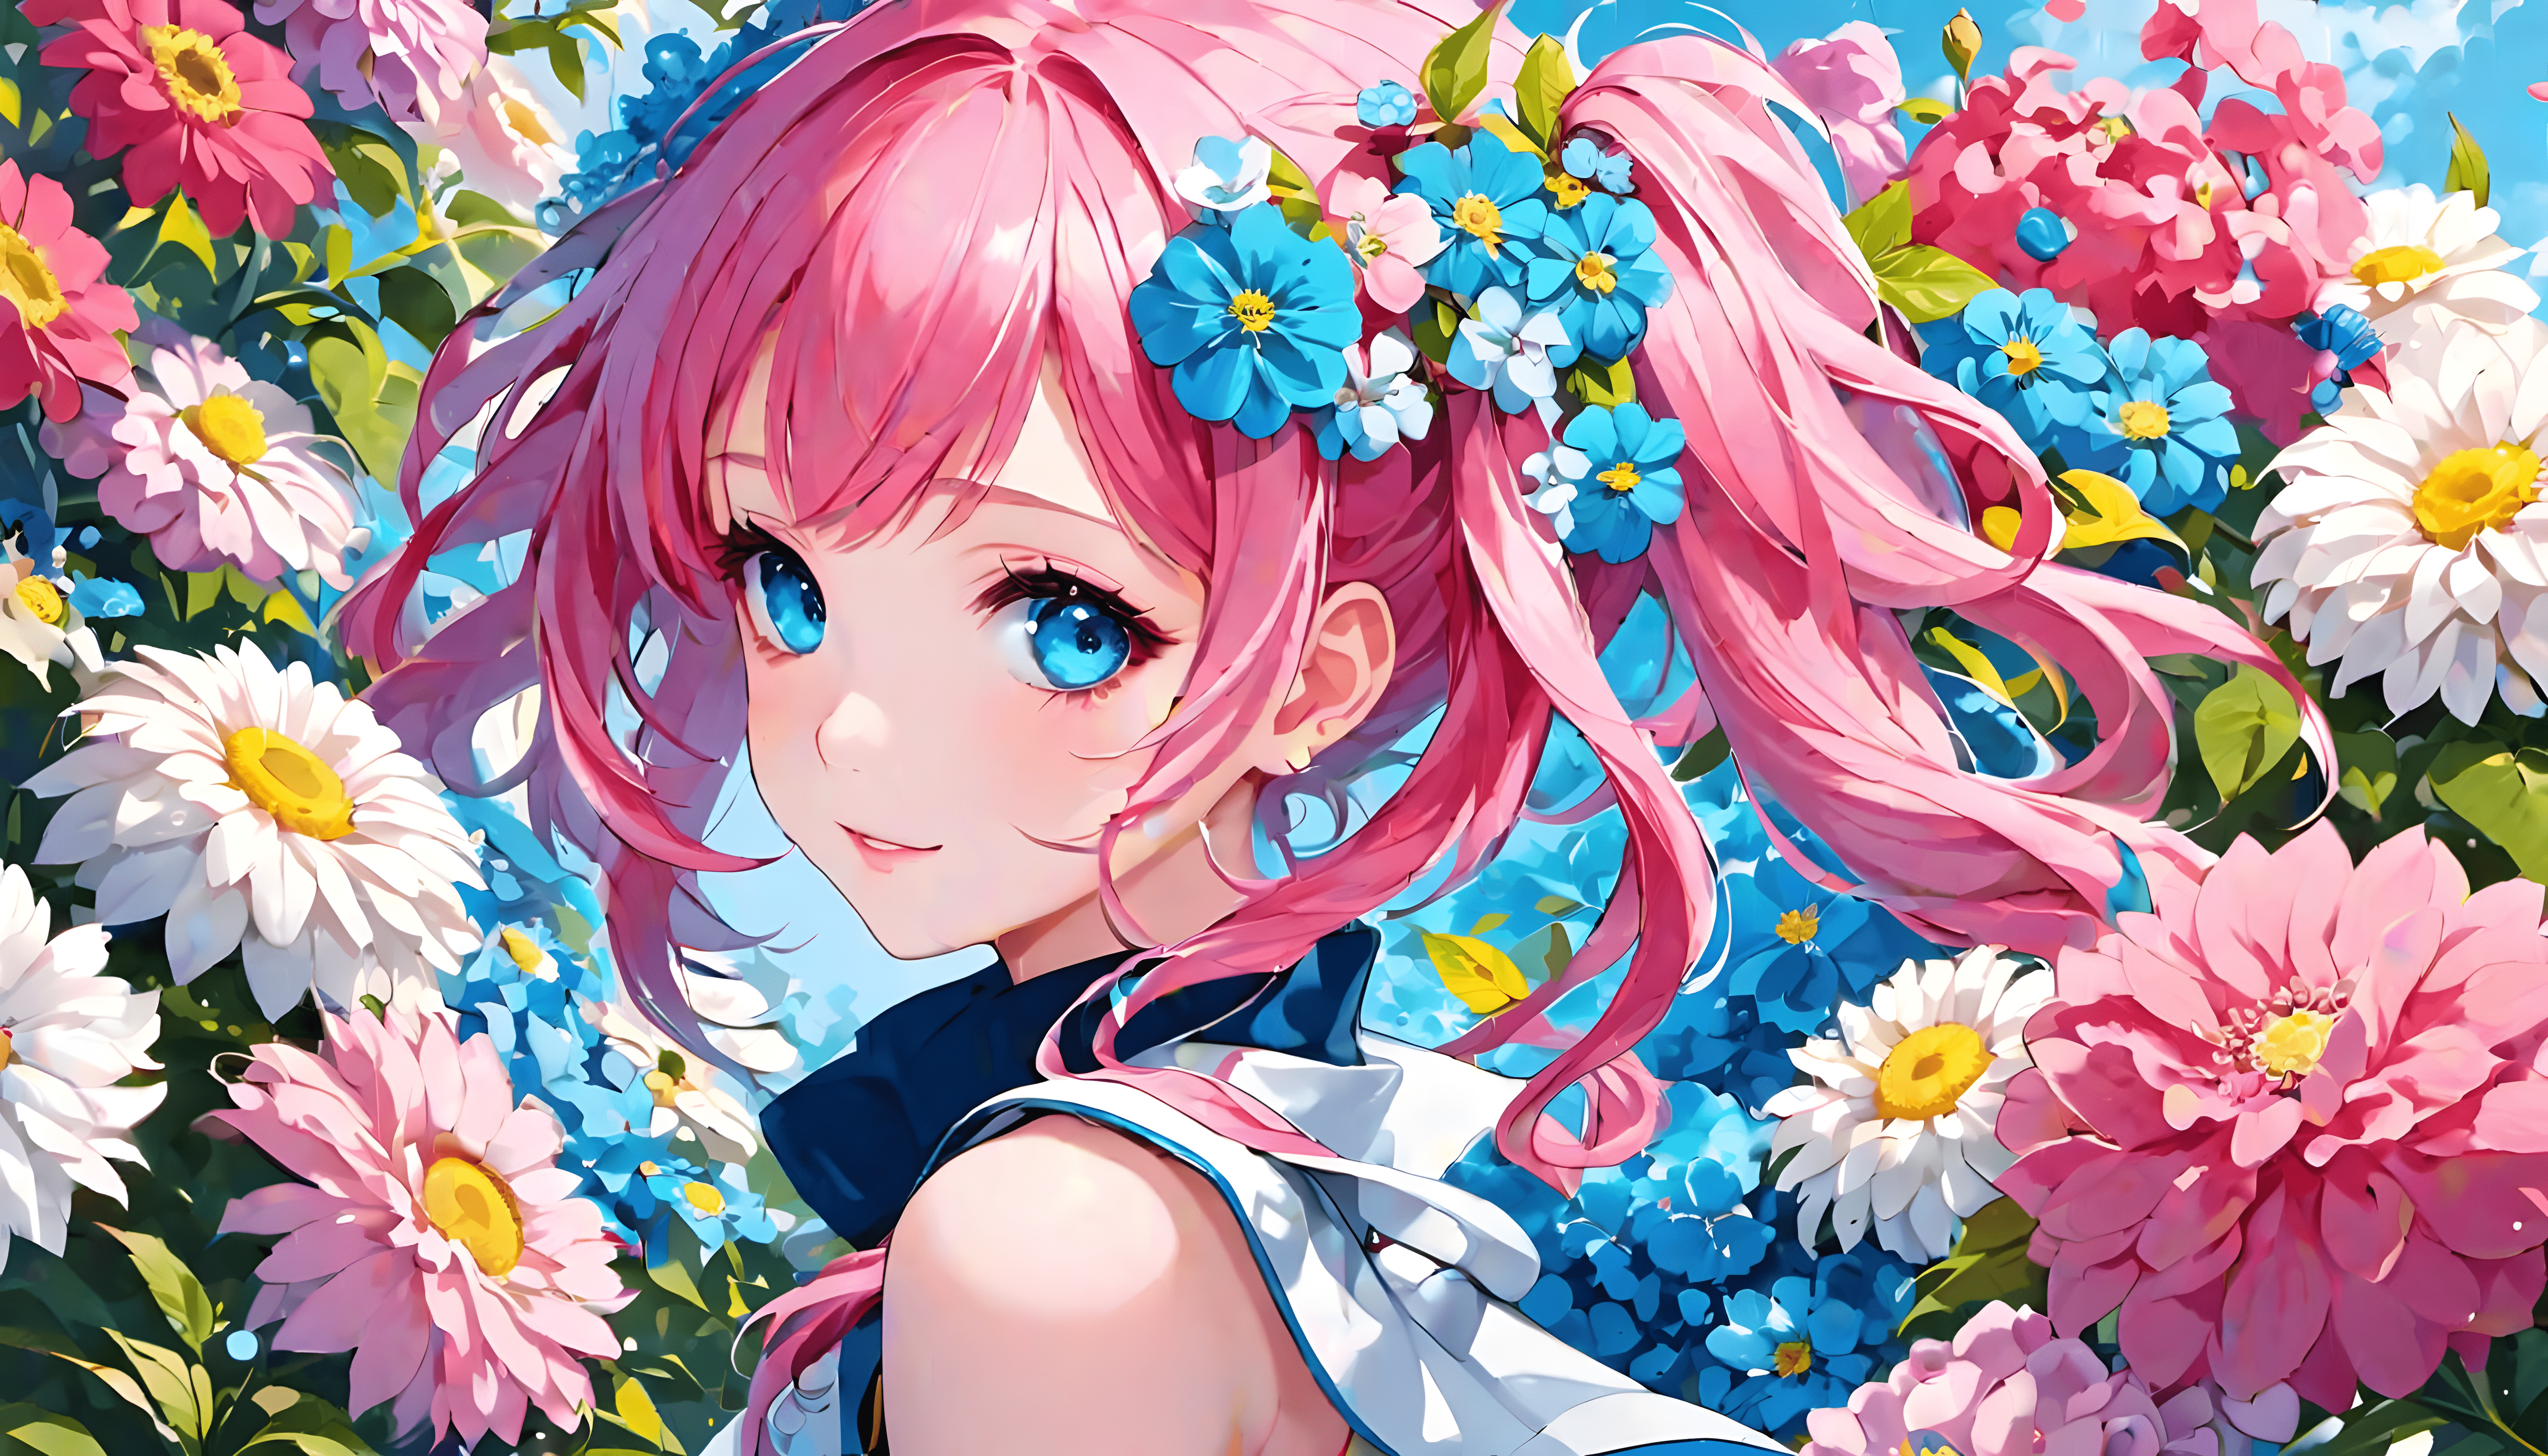 Cute Anime girl character wallpaper. 25938361 Stock Photo at Vecteezy